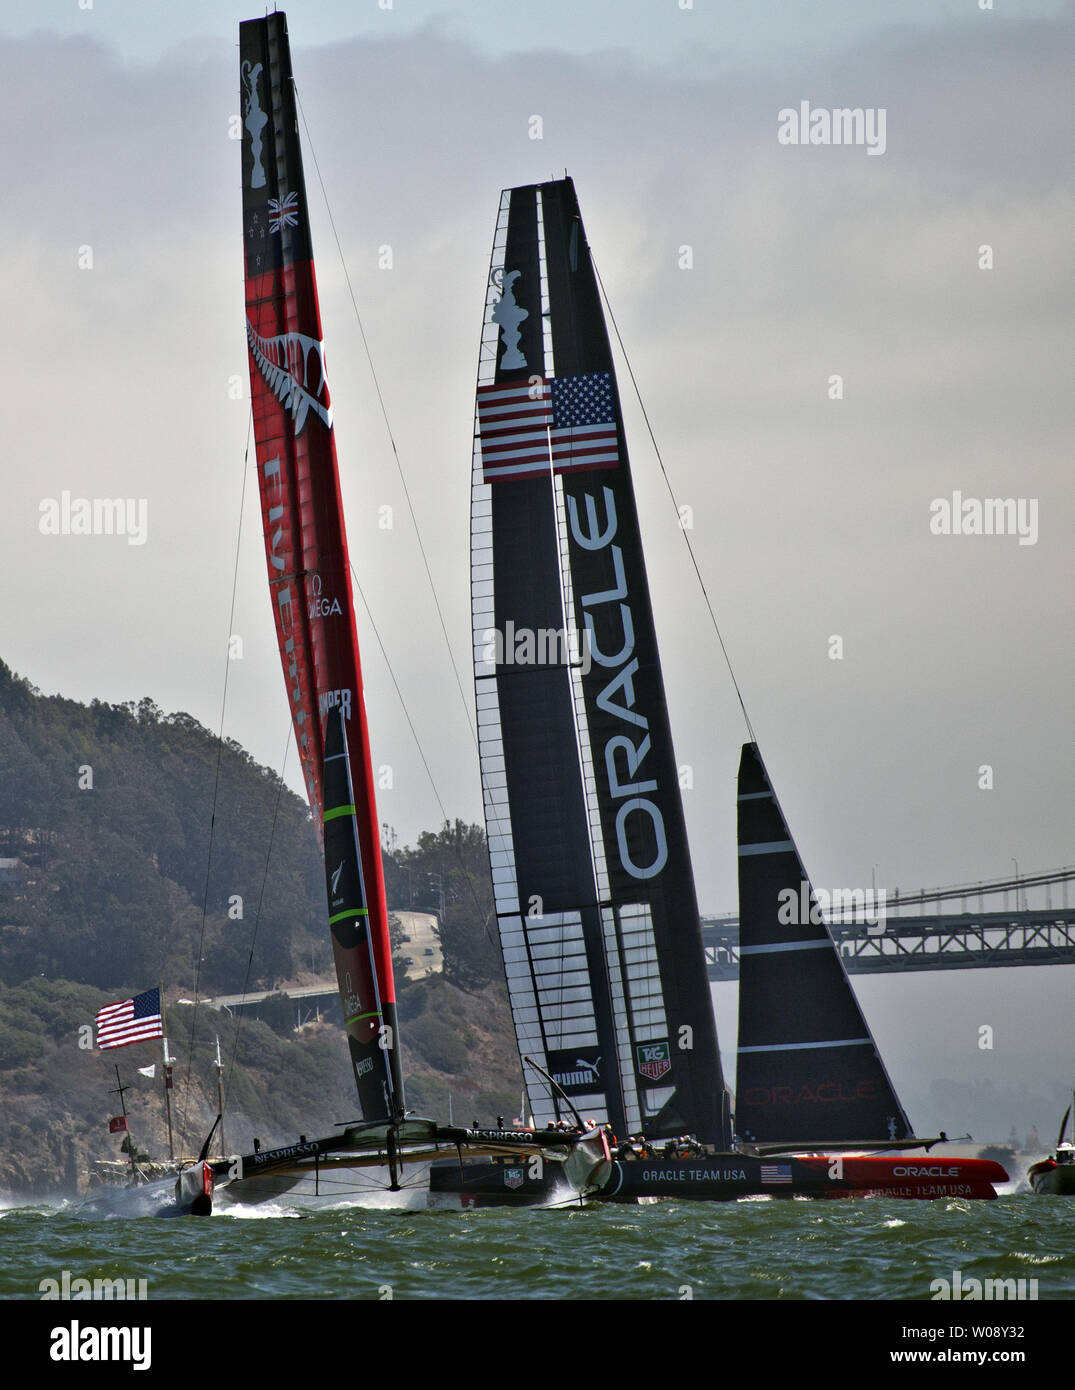 Emirates New Zealand (L) and Oracle Team USA sail upwind in race eight of the America's Cup series on San Francisco Bay on September 14, 2013. The USA won the race as the Kiwis nearly capsized near the windward mark.   UPI/Terry Schmitt Stock Photo